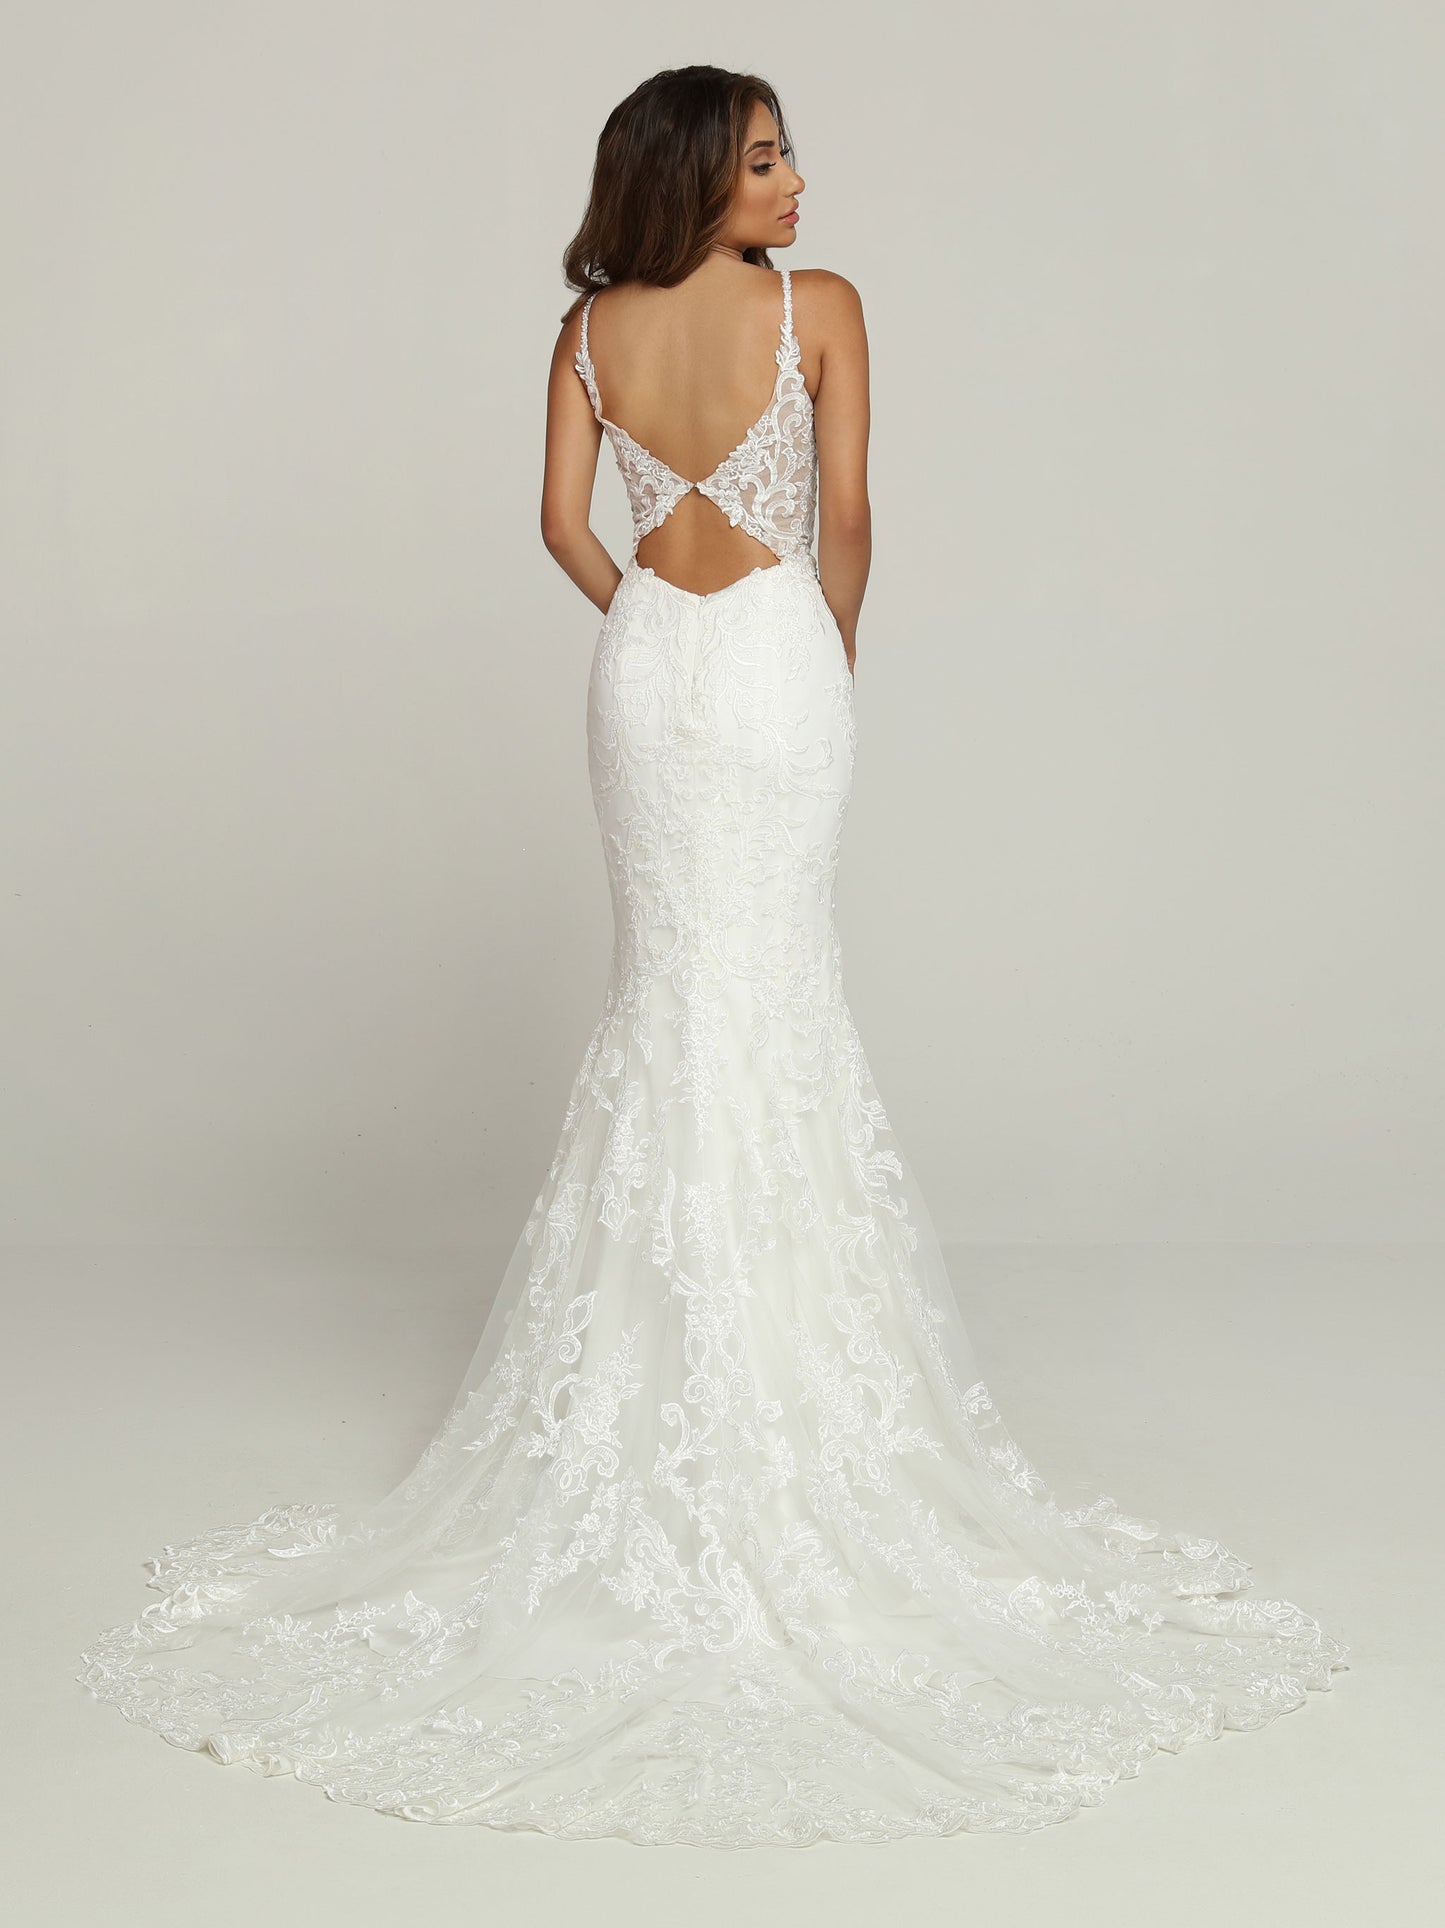 Davinci Bridal 50700 Long Sheer Lace V Neck Wedding Dress Flare Bridal Gown Cutout Back A Peek-a-Boo Back makes this Lace Sheath Fit & Flare Wedding Dress truly Runway Worthy. The Sheer Lace Bodice has a Plunging V-Neckline & Narrow Shoulder Straps. Triangle Shaped Bodice Sides connect to create a Double Keyhole over an Open Back. The Form-Fitting Fit & Flare Skirt ends in a Chapel Train.